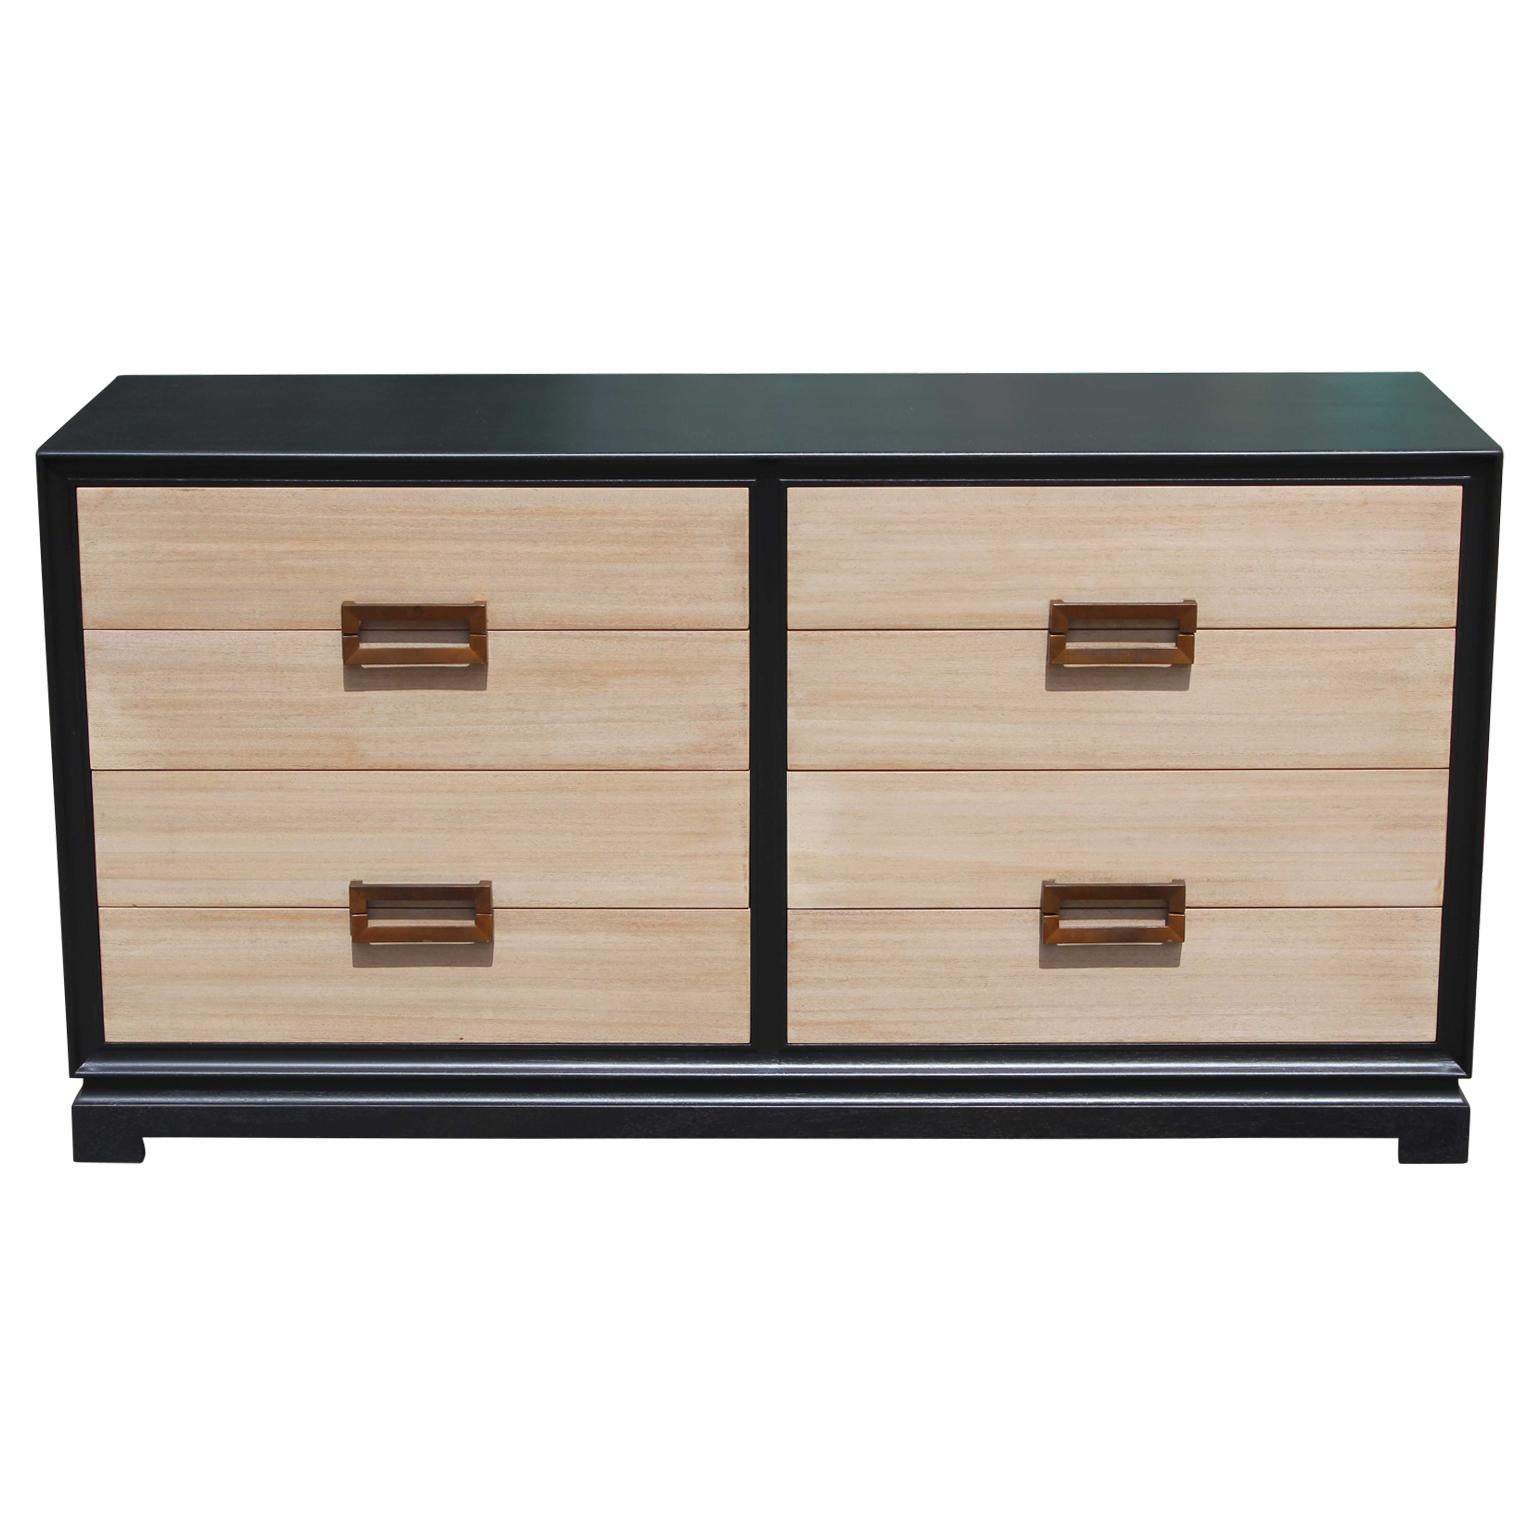 Modern two-tone eight-drawer dresser with a neutral finish on the front of the drawers with brass pulls. In the style of Grosfeld House or Dunbar.